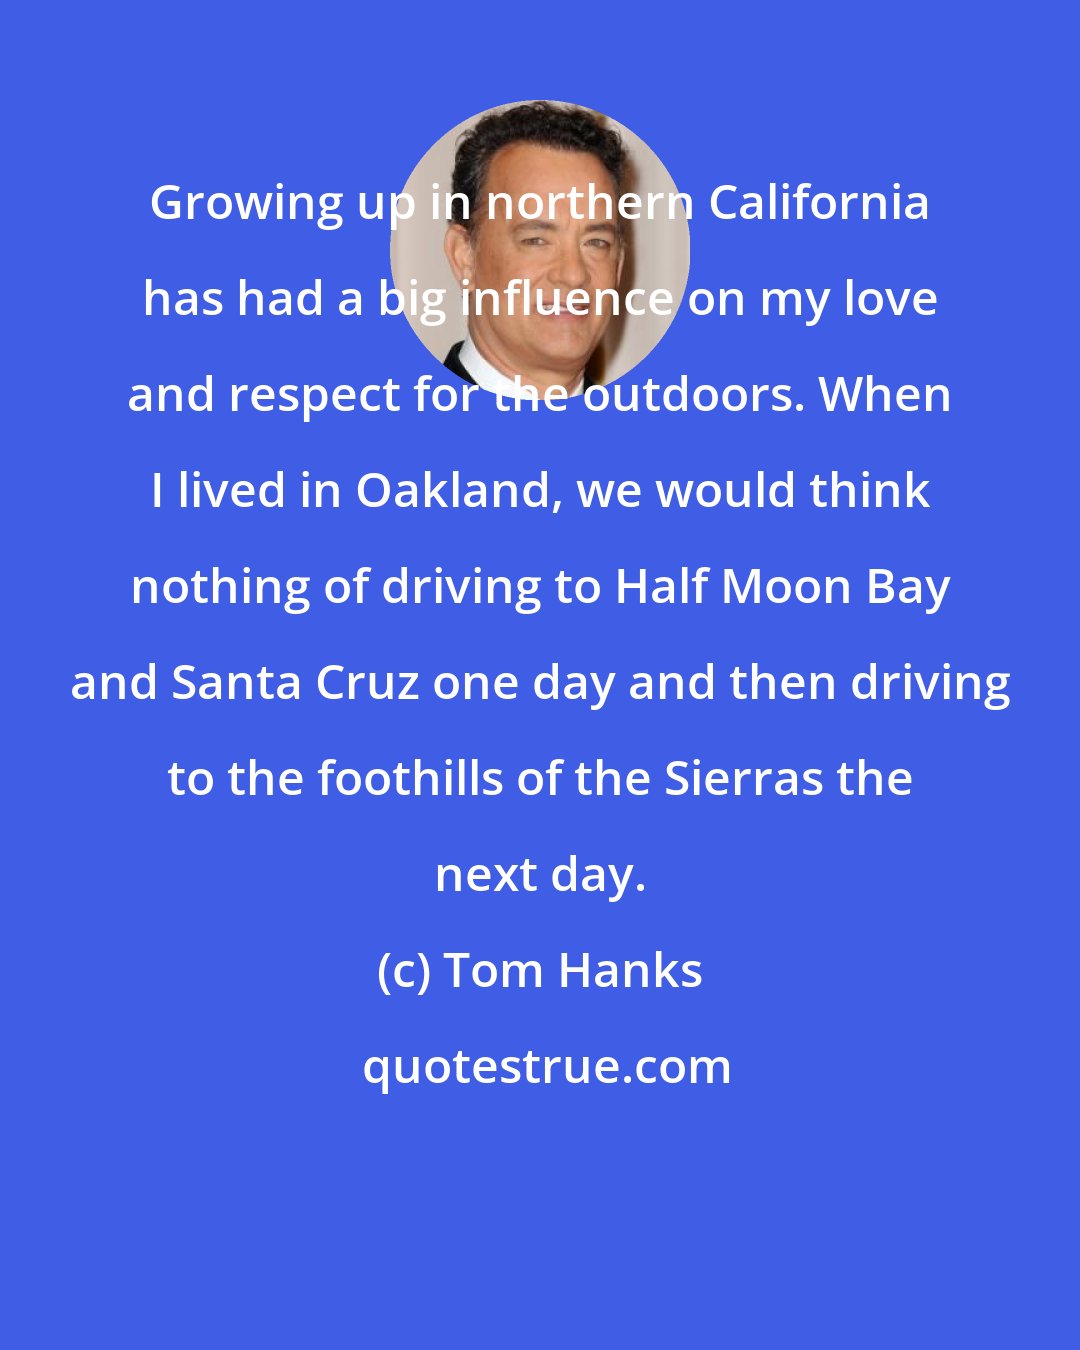 Tom Hanks: Growing up in northern California has had a big influence on my love and respect for the outdoors. When I lived in Oakland, we would think nothing of driving to Half Moon Bay and Santa Cruz one day and then driving to the foothills of the Sierras the next day.